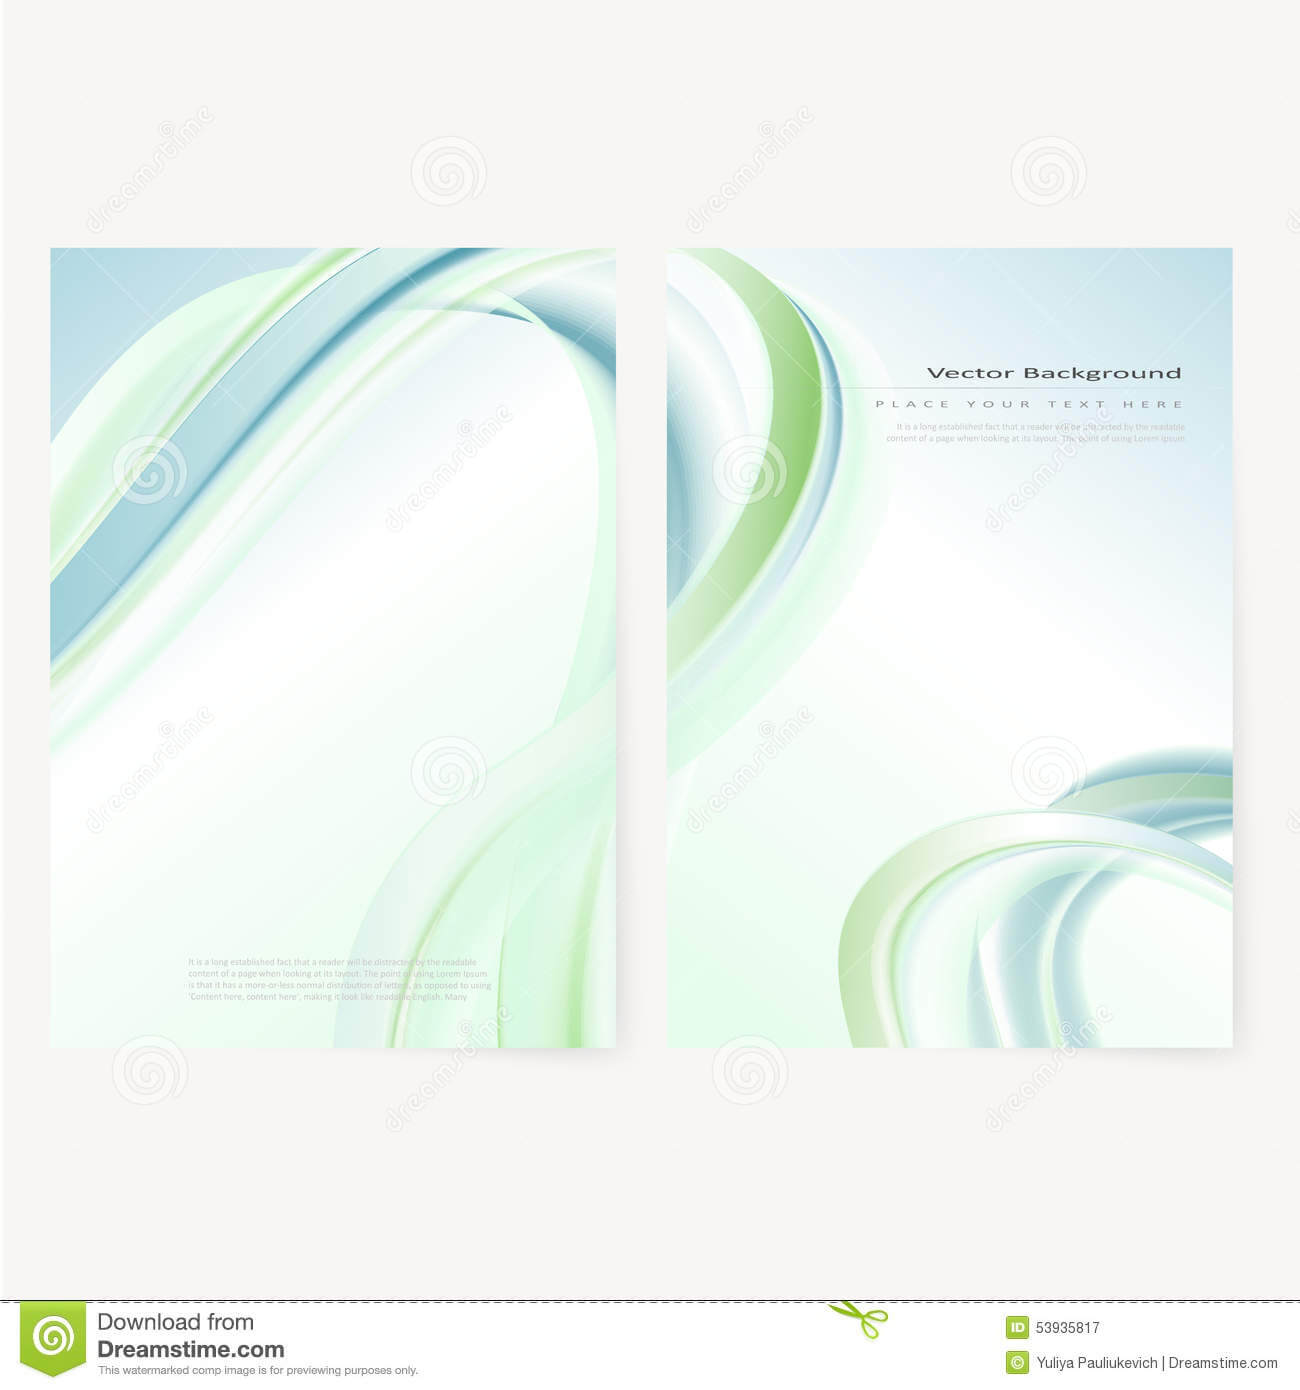 Vector Business Brochure, Flyer Template Stock Vector Pertaining To Blank Templates For Flyers